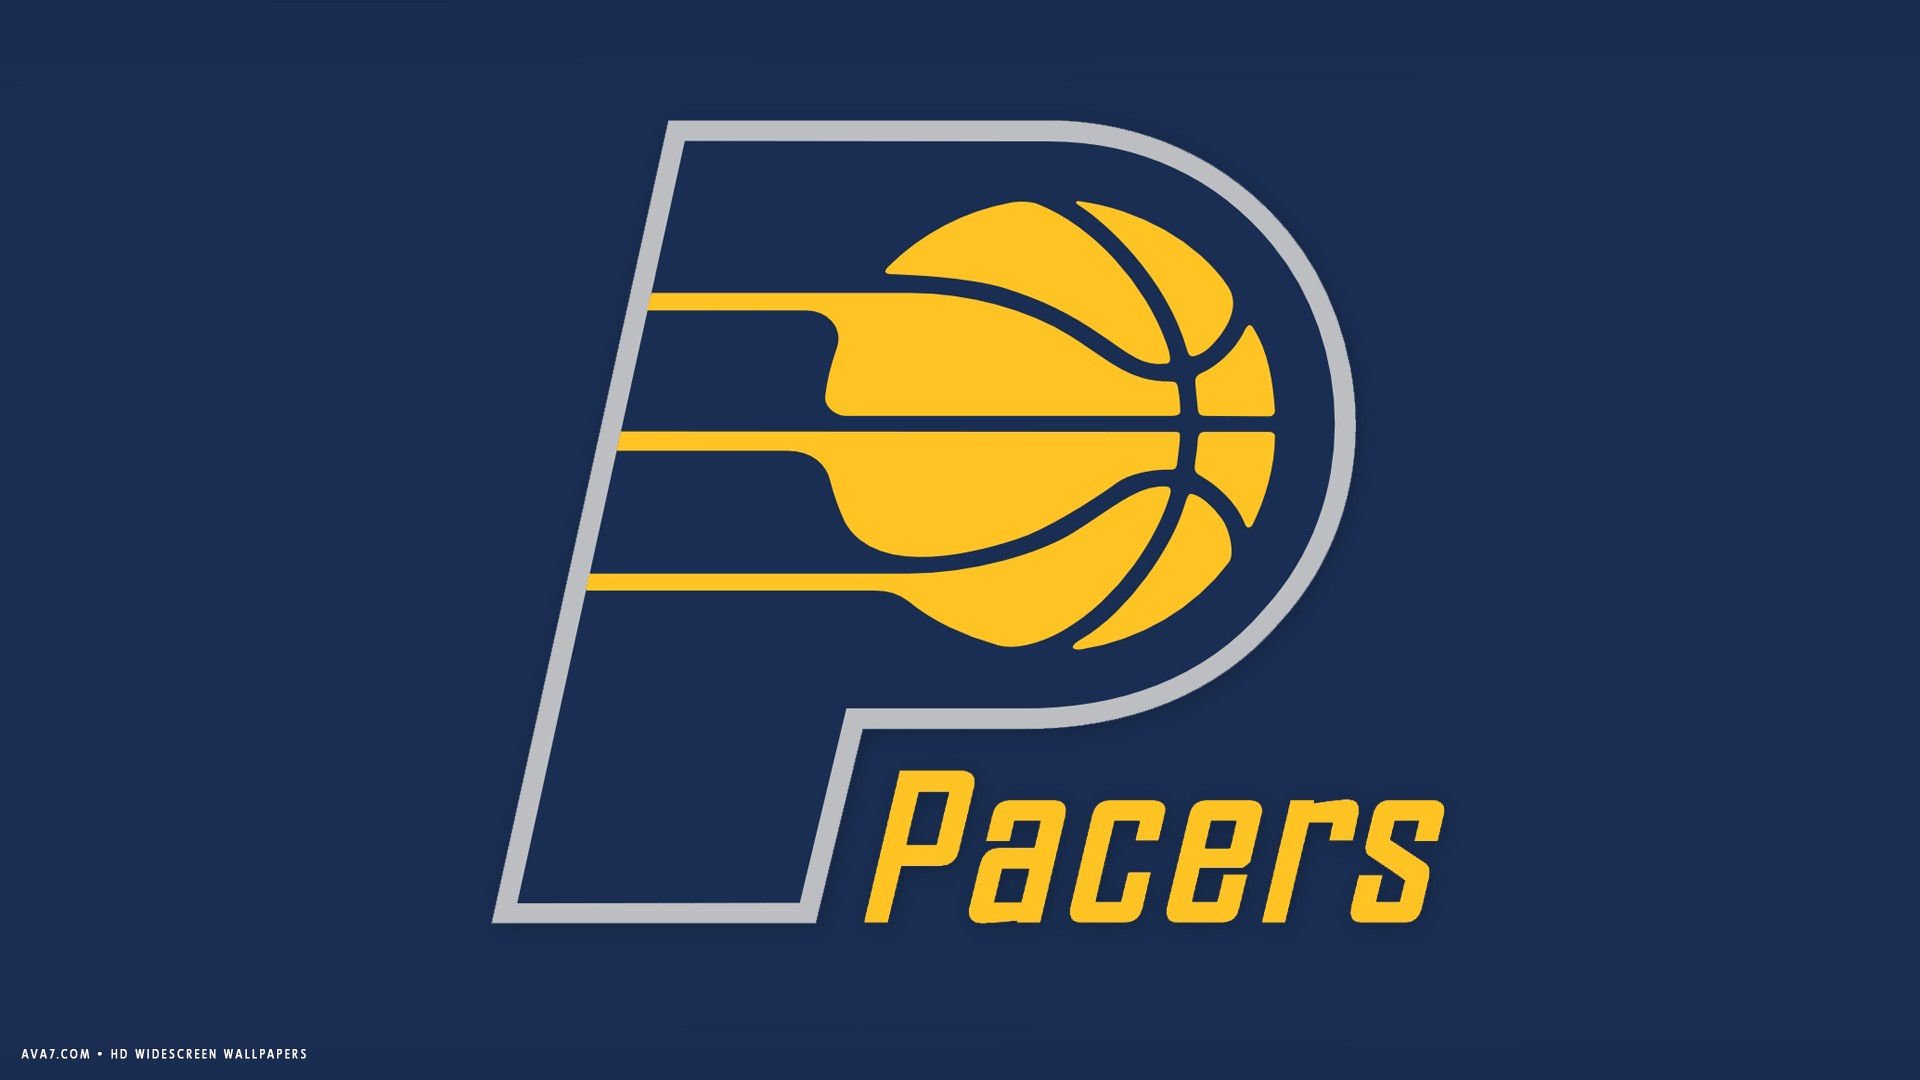 Indiana Pacers Wallpaper 9   1920 X 1080 stmednet